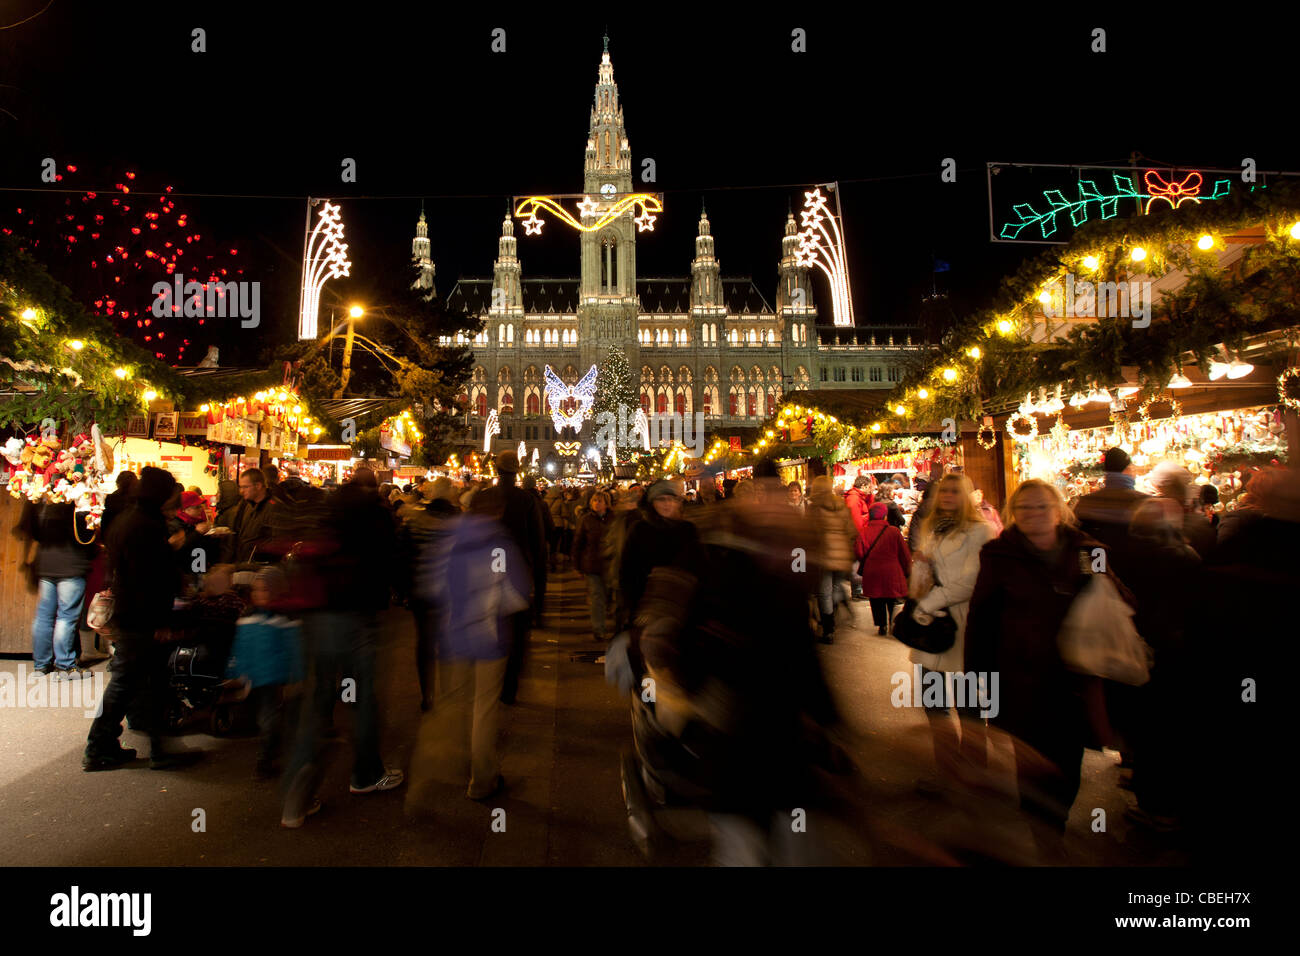 Christmas lights illuminate the night sky as people gather at the Wiener Christkindlmarkt, at Vienna Town Hall in Austria. Stock Photo